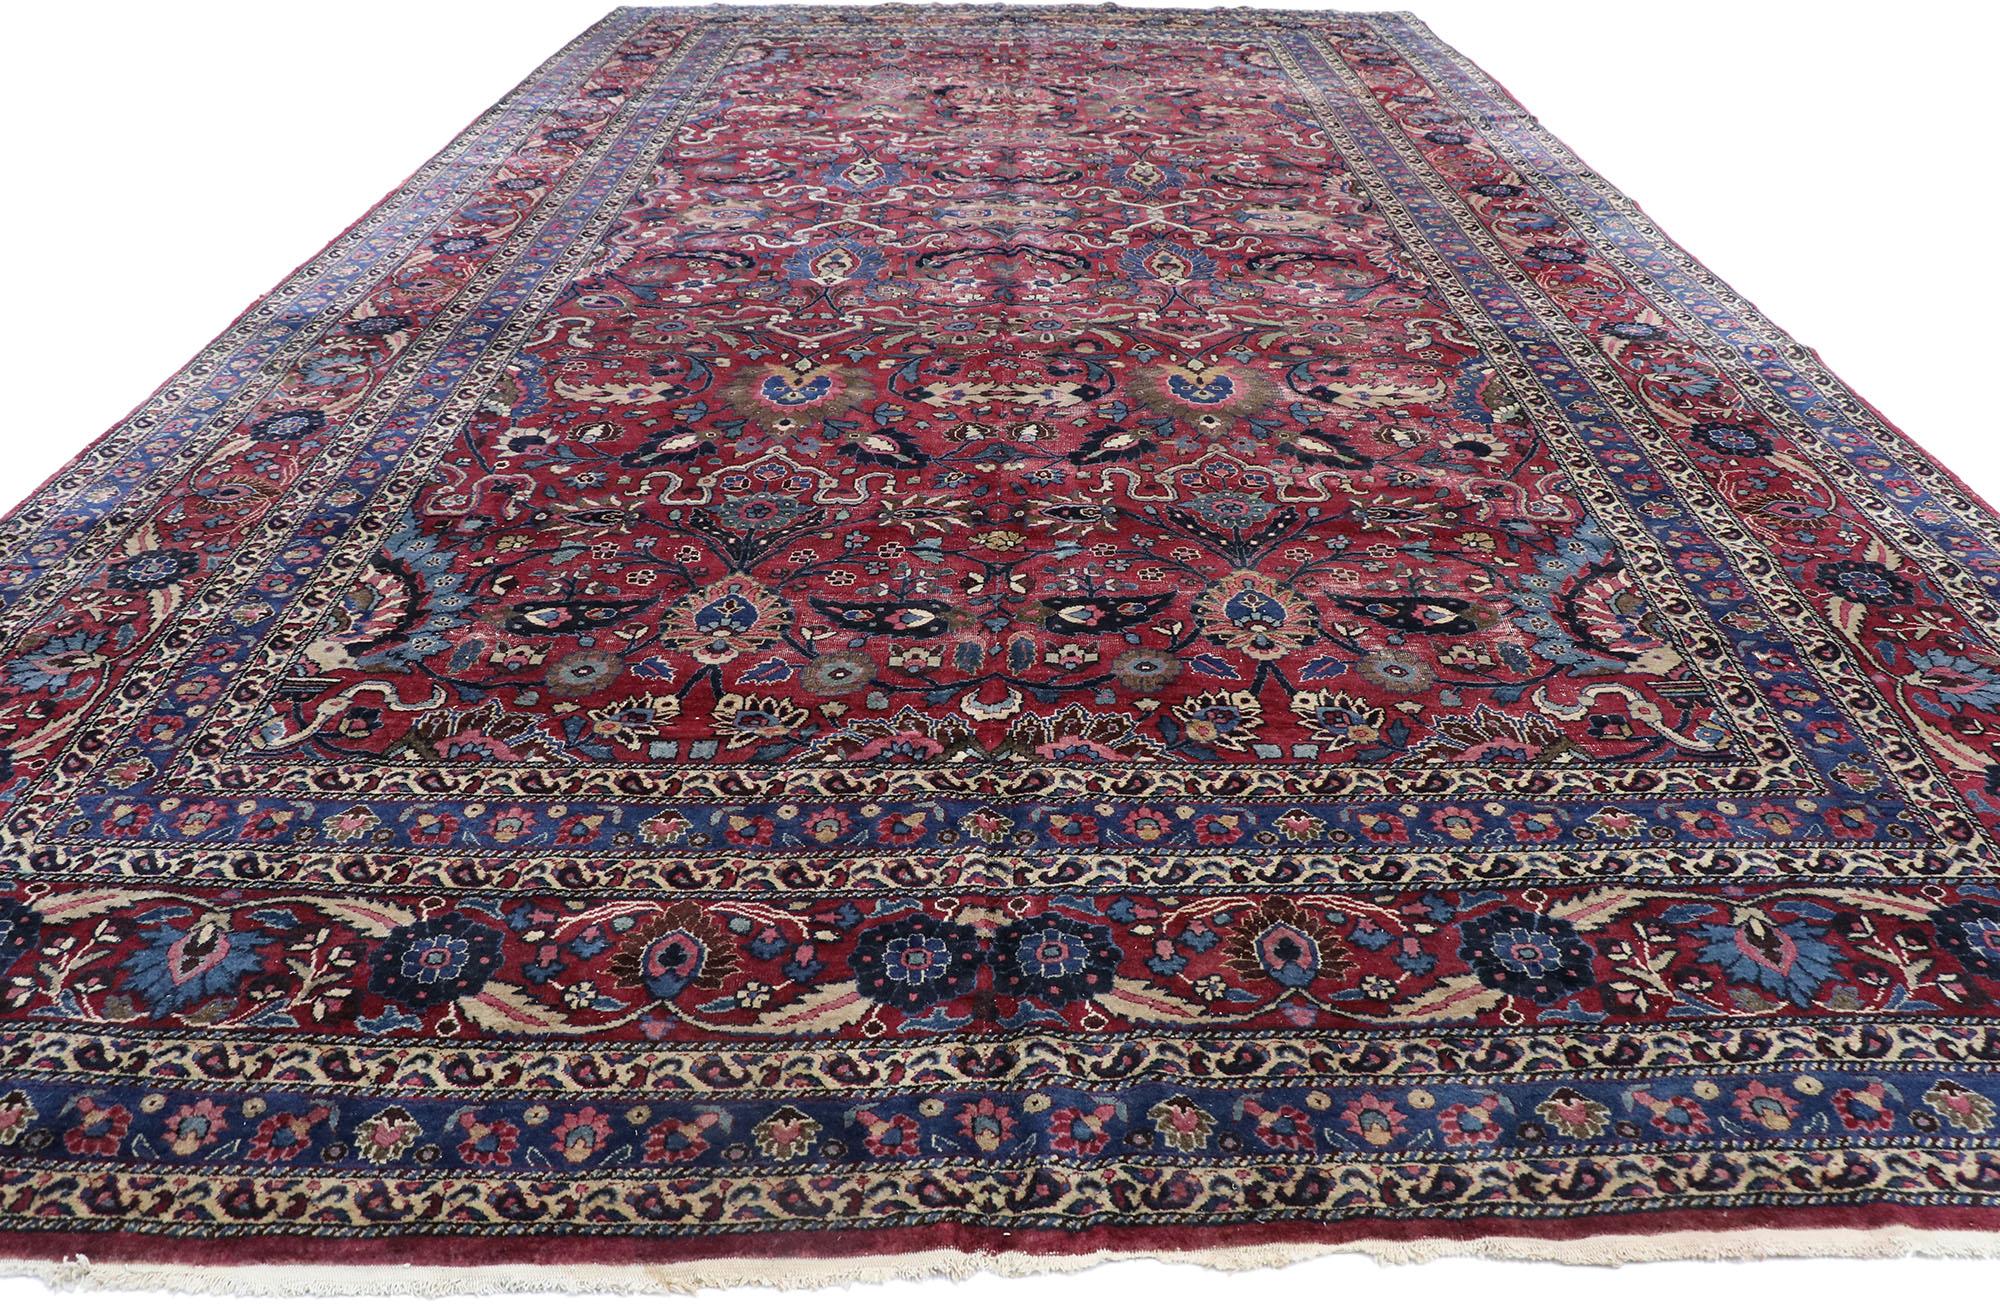 Tabriz Antique Persian Mashhad Rug with Rustic Victorian Style For Sale